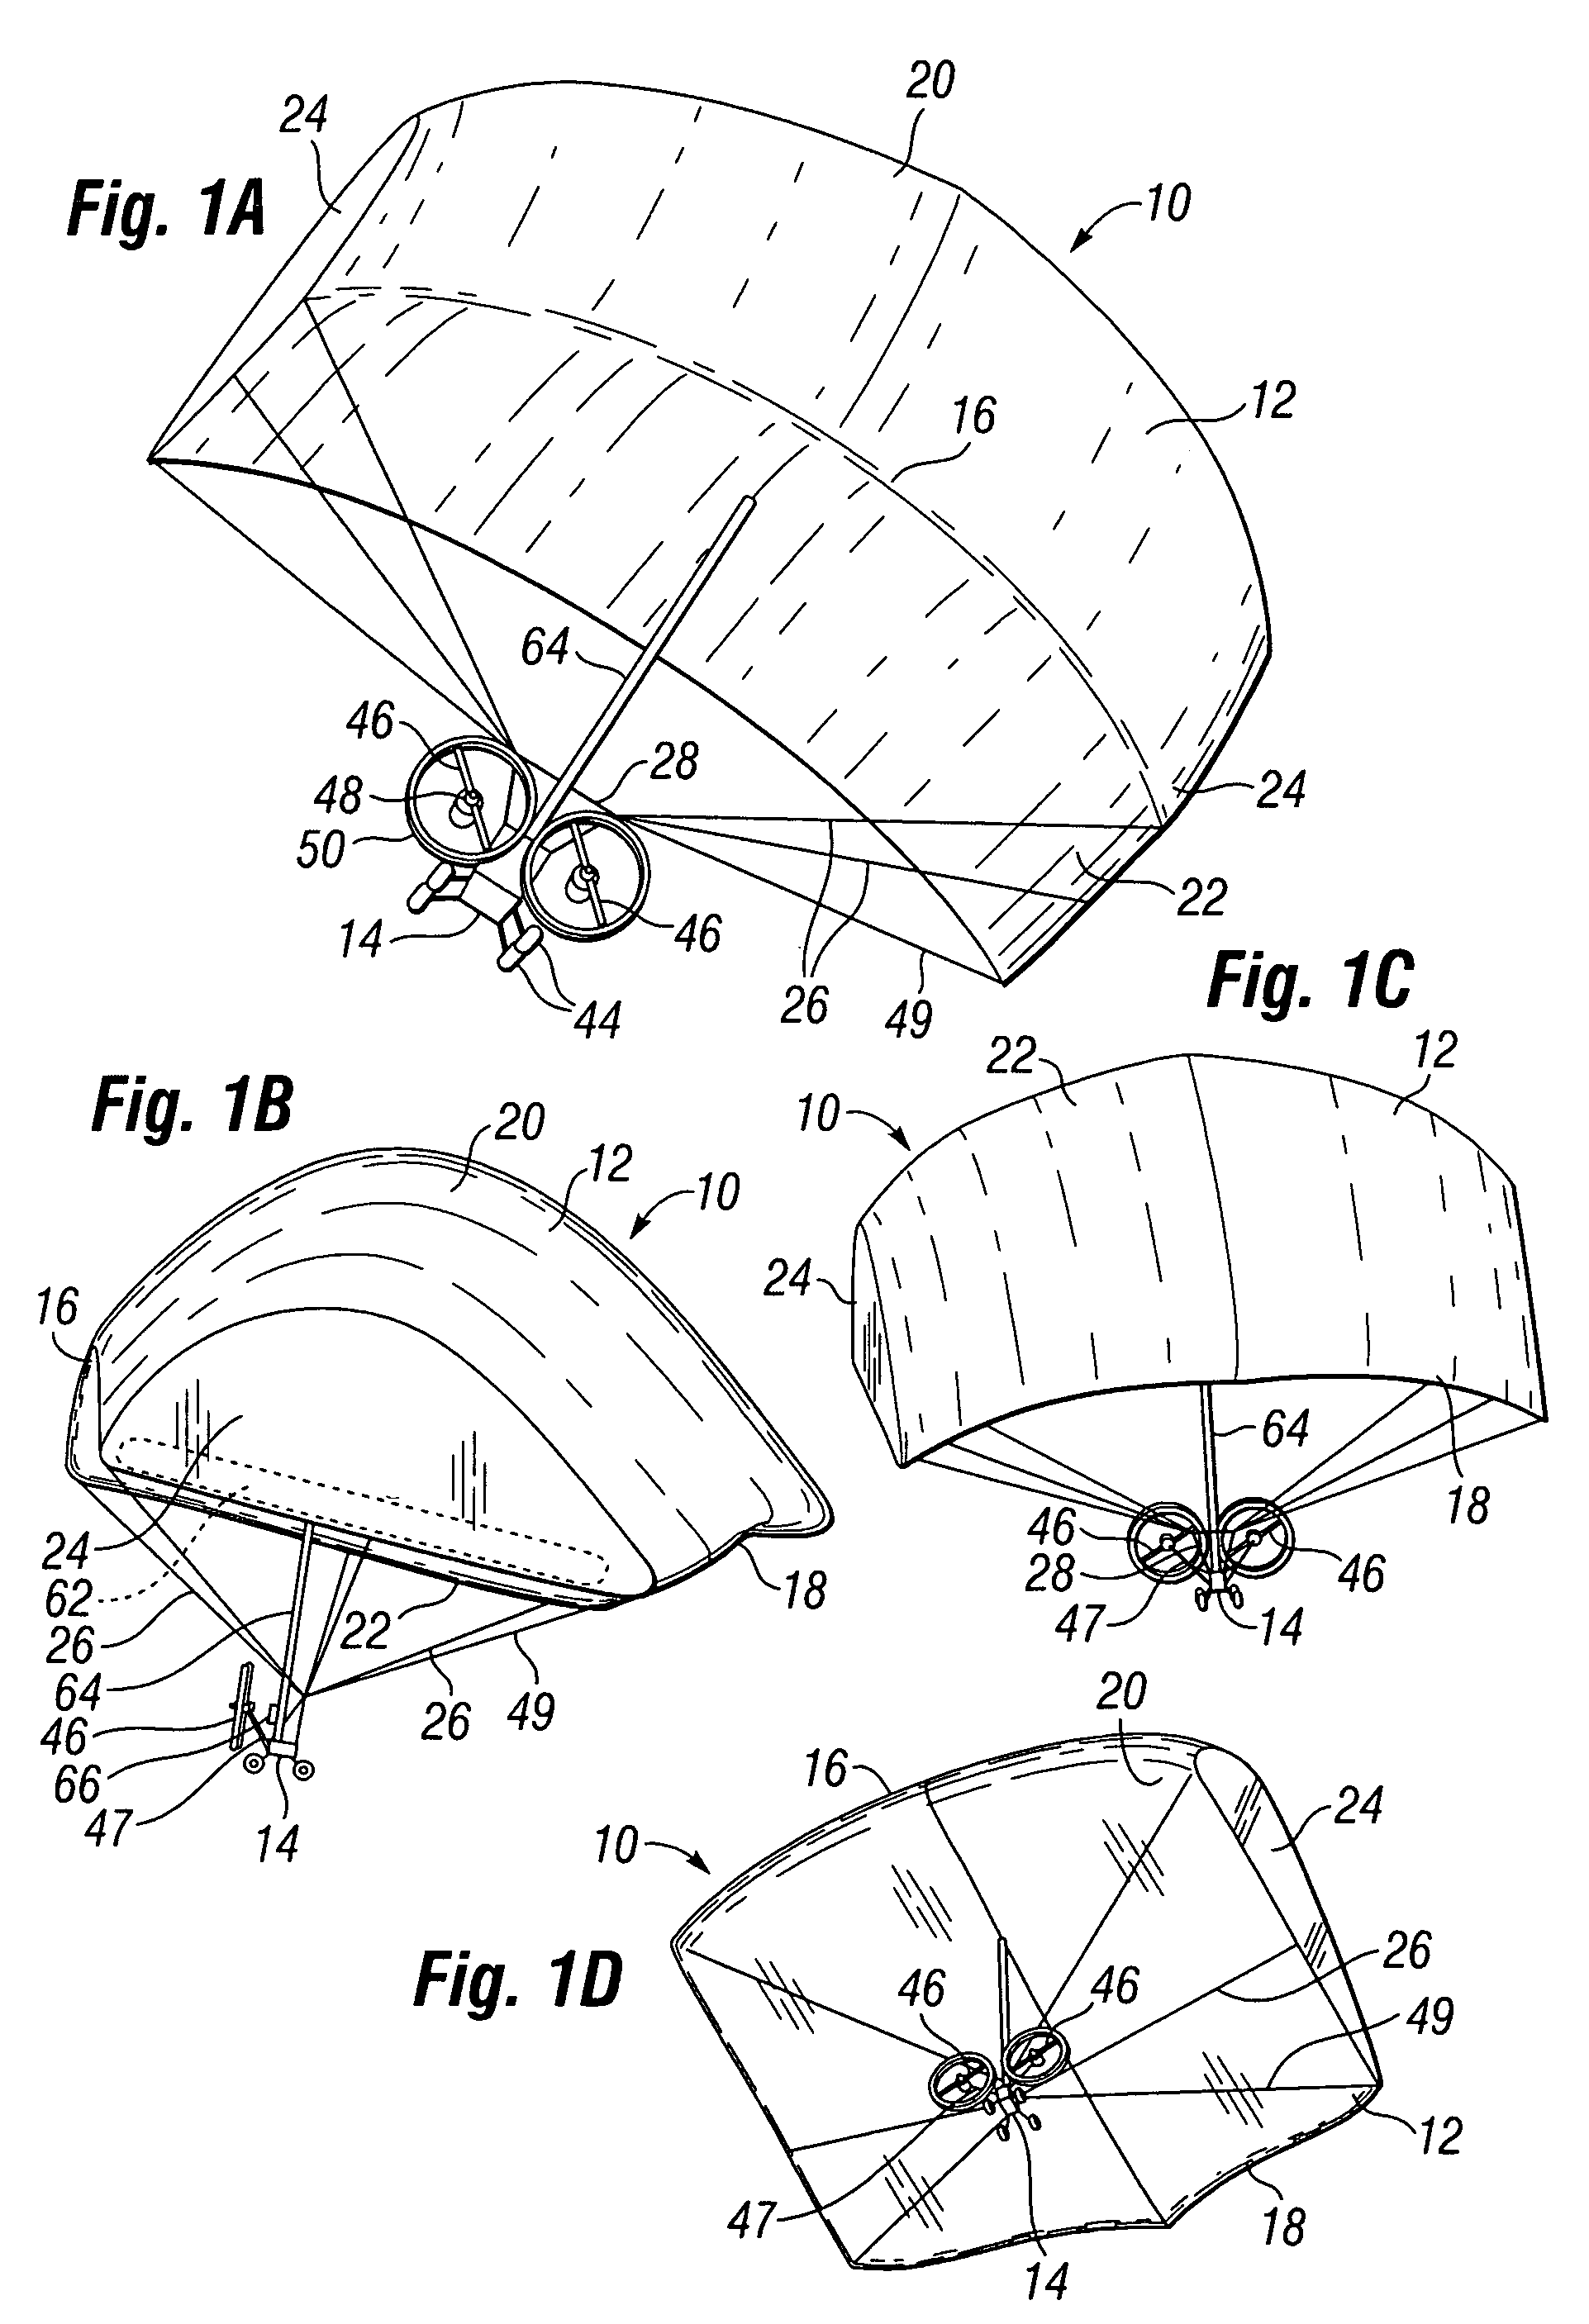 Inflatable wing flight vehicle